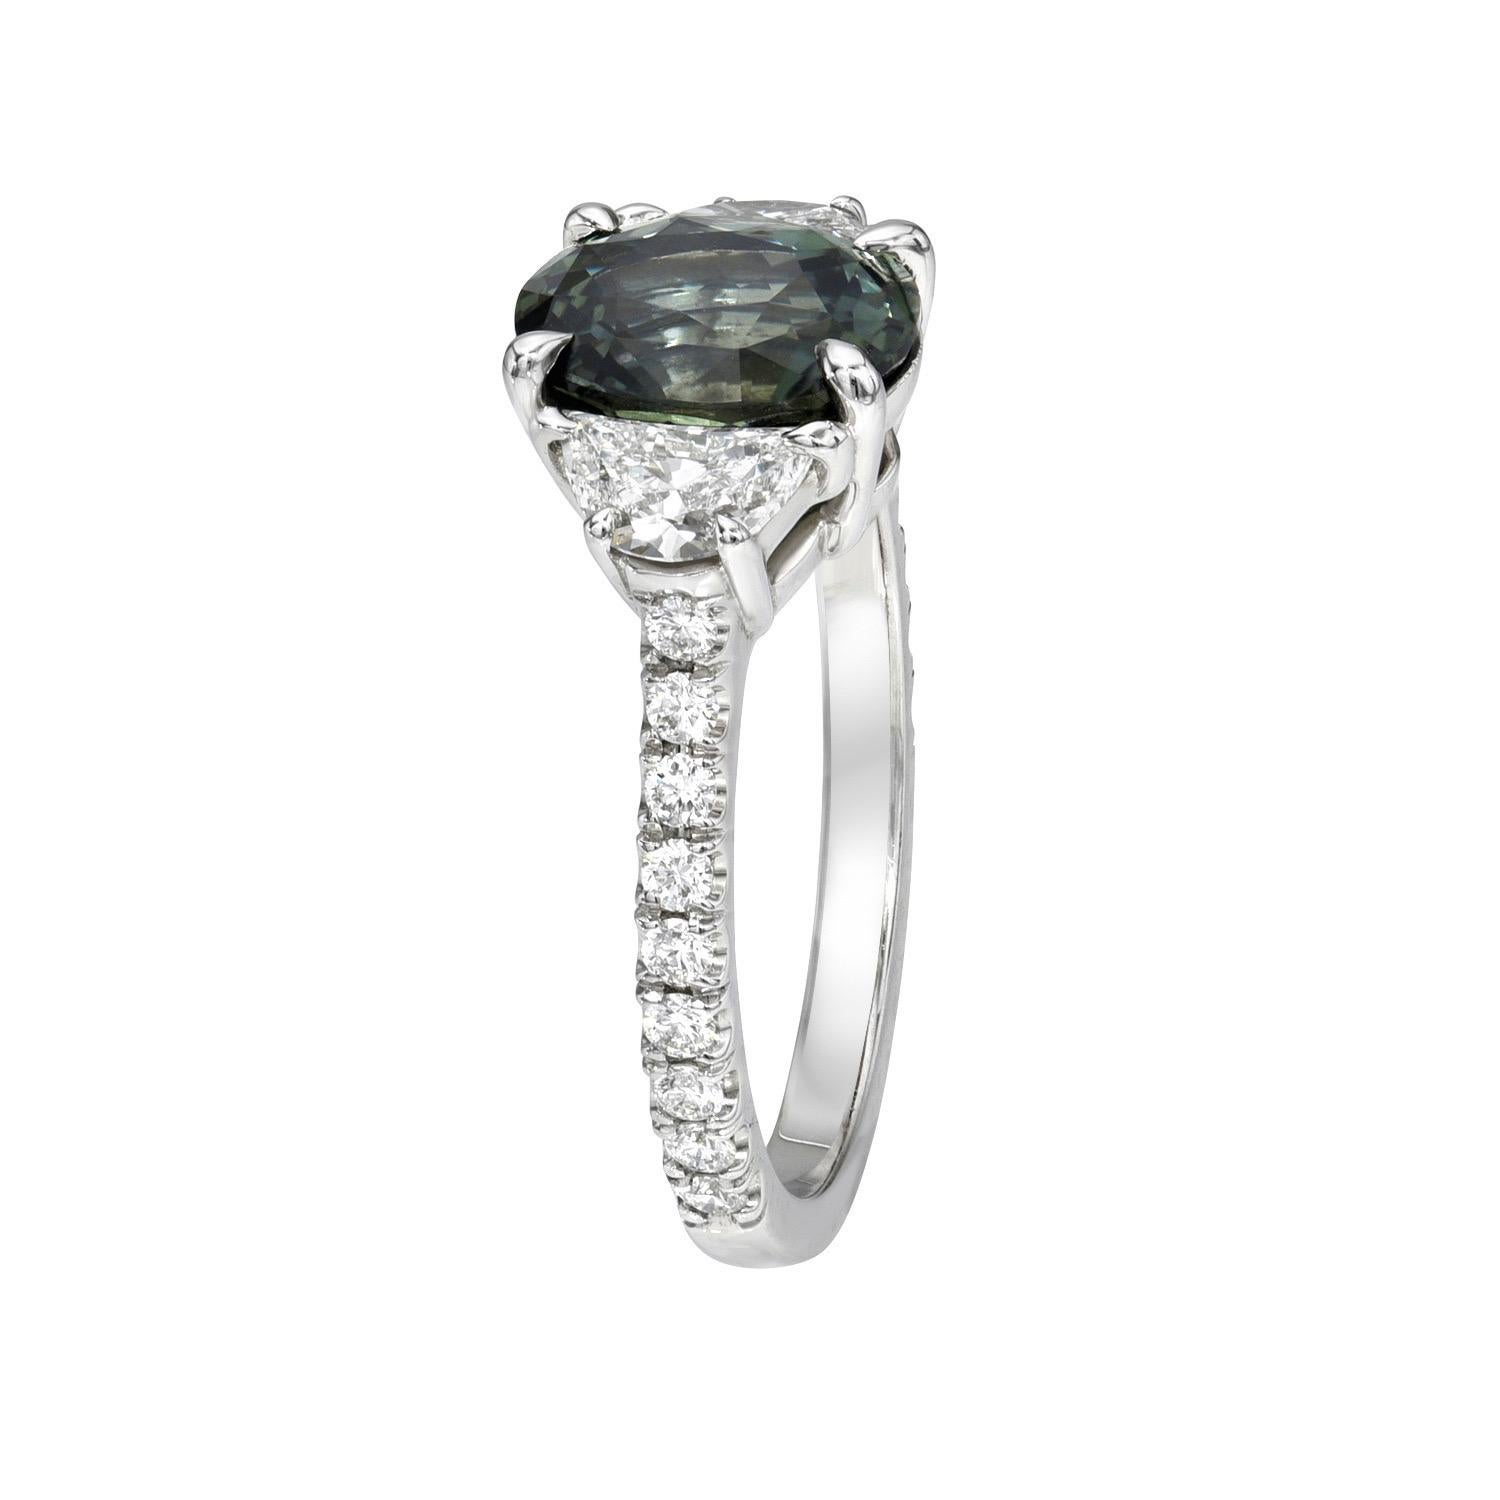 Exclusive 2.58 carat natural unheated Green Sapphire oval, three stone platinum ring, decorated with a pair of 0.54 carats, F color/VS2-SI1 clarity, crescent diamonds, and a total of 0.27 carats, round brilliant diamonds.
Size 6. Re-sizing is